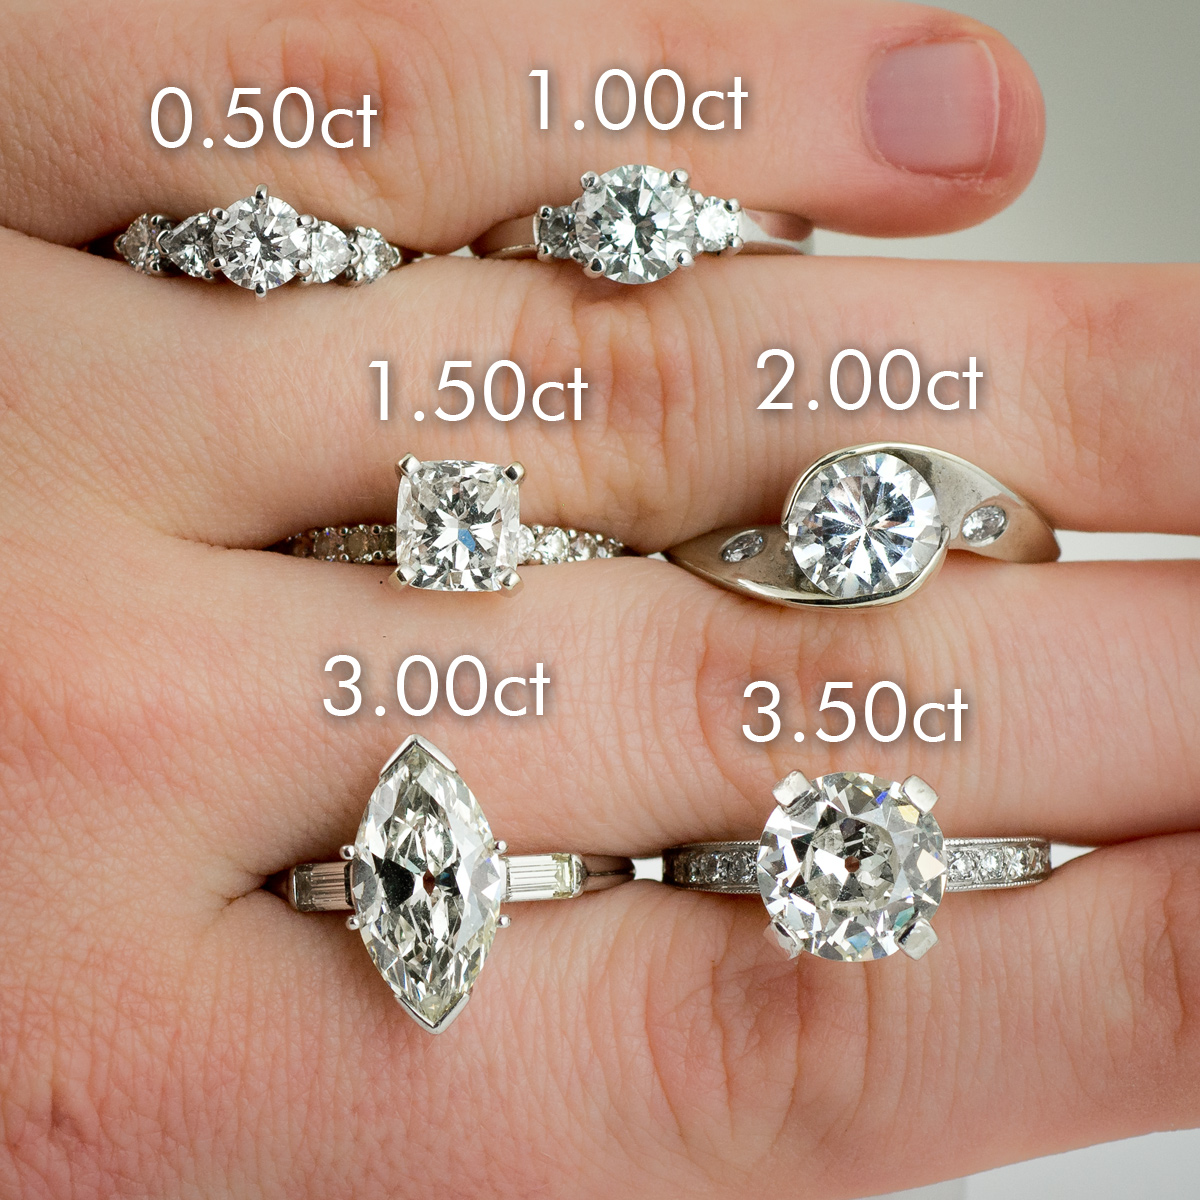 Diamond Buying Guide: the 4 C’s : Learn About Diamond Color, Cut ...